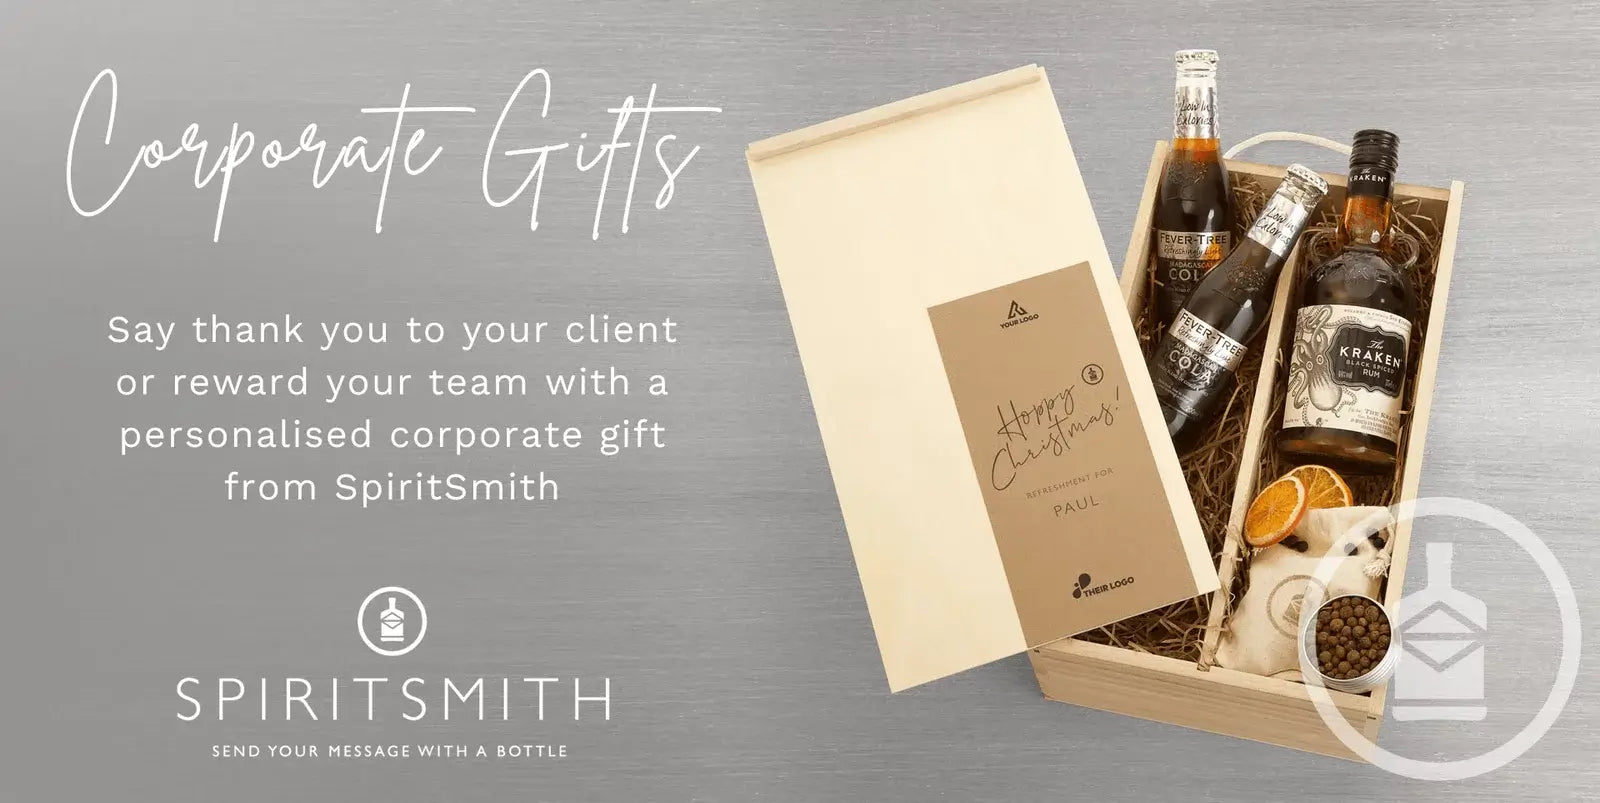 Holiday Gift Ideas for Small Businesses: 25 Things Your Clients Will Love